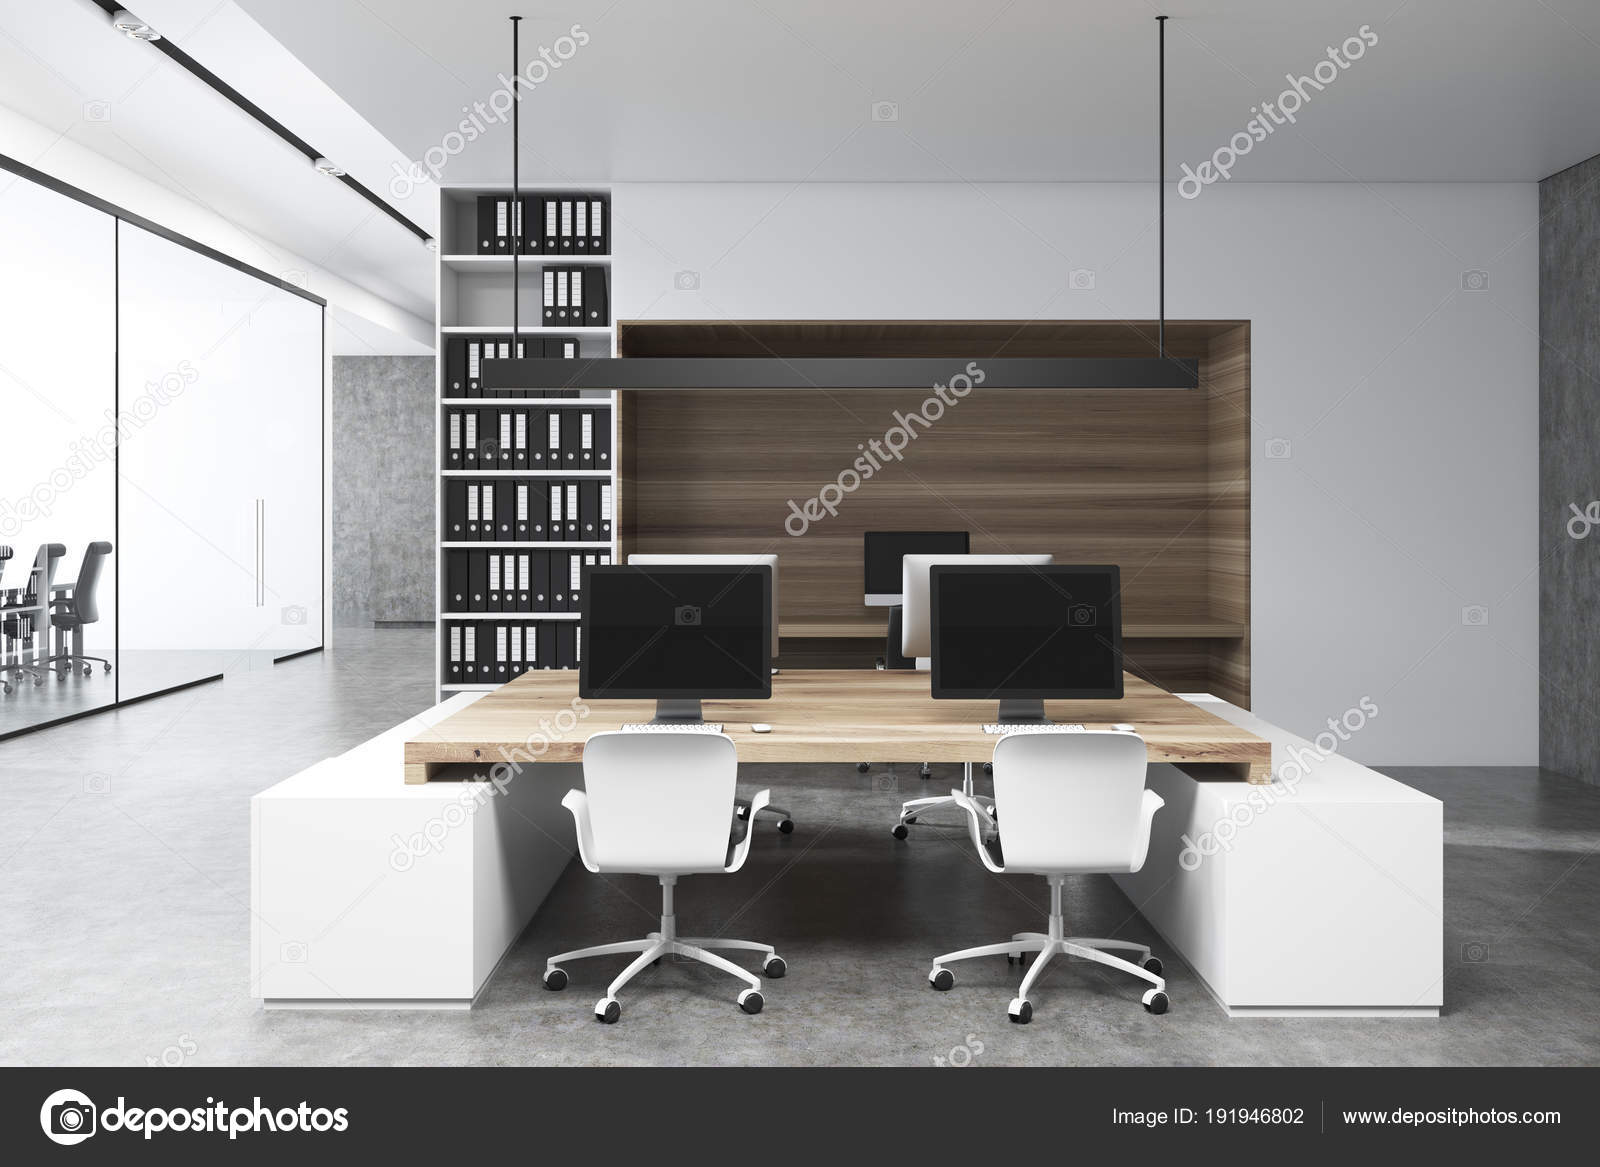 Office background Stock Photos, Royalty Free Office background Images |  Depositphotos